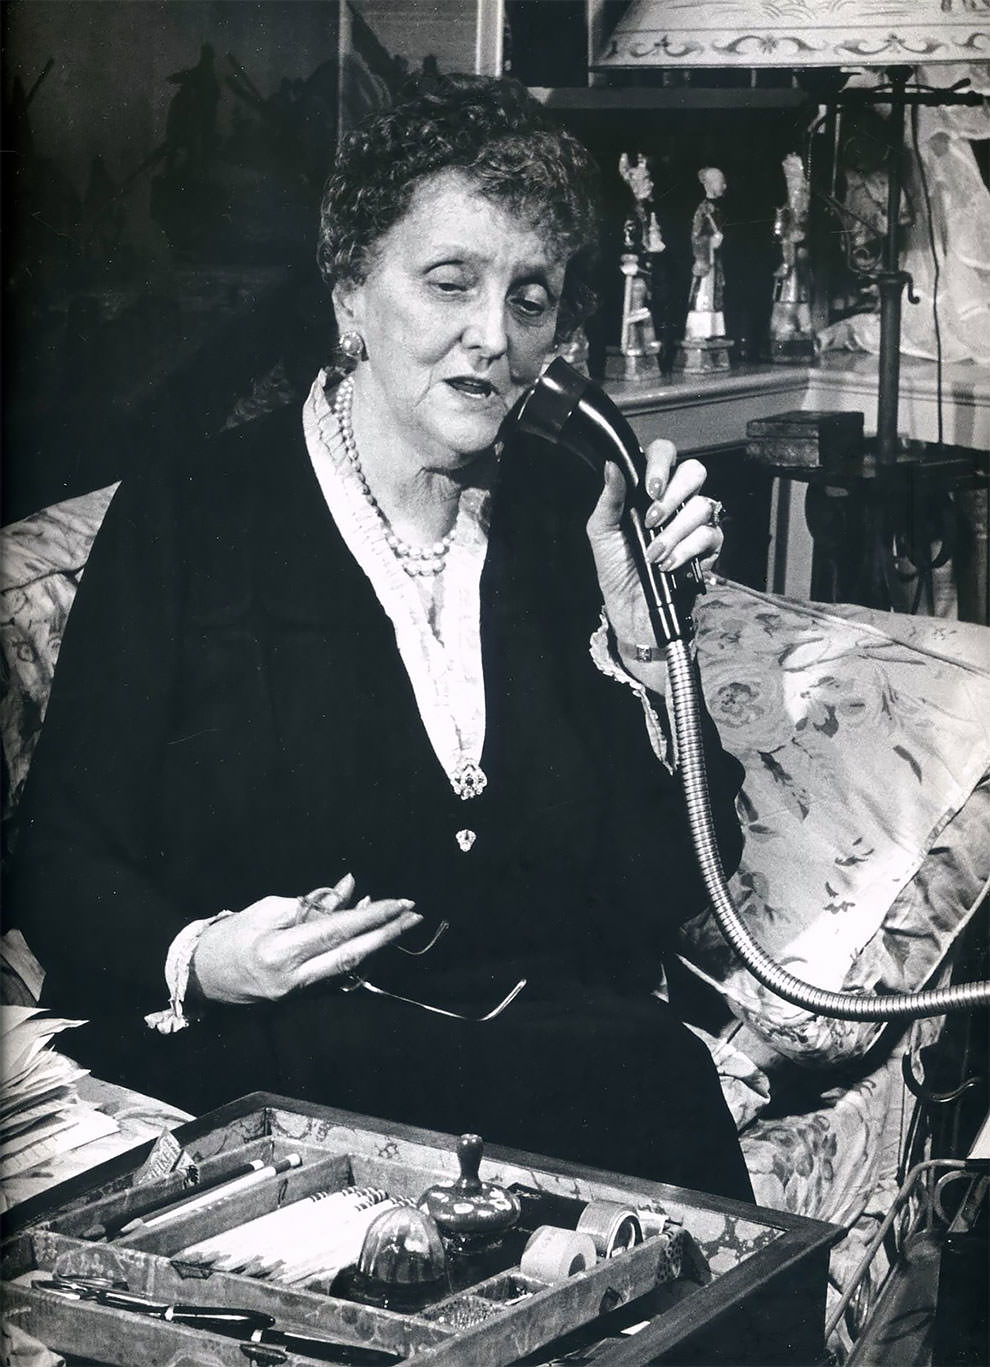 American writer and authority on etiquette Emily Post. USA, 1946